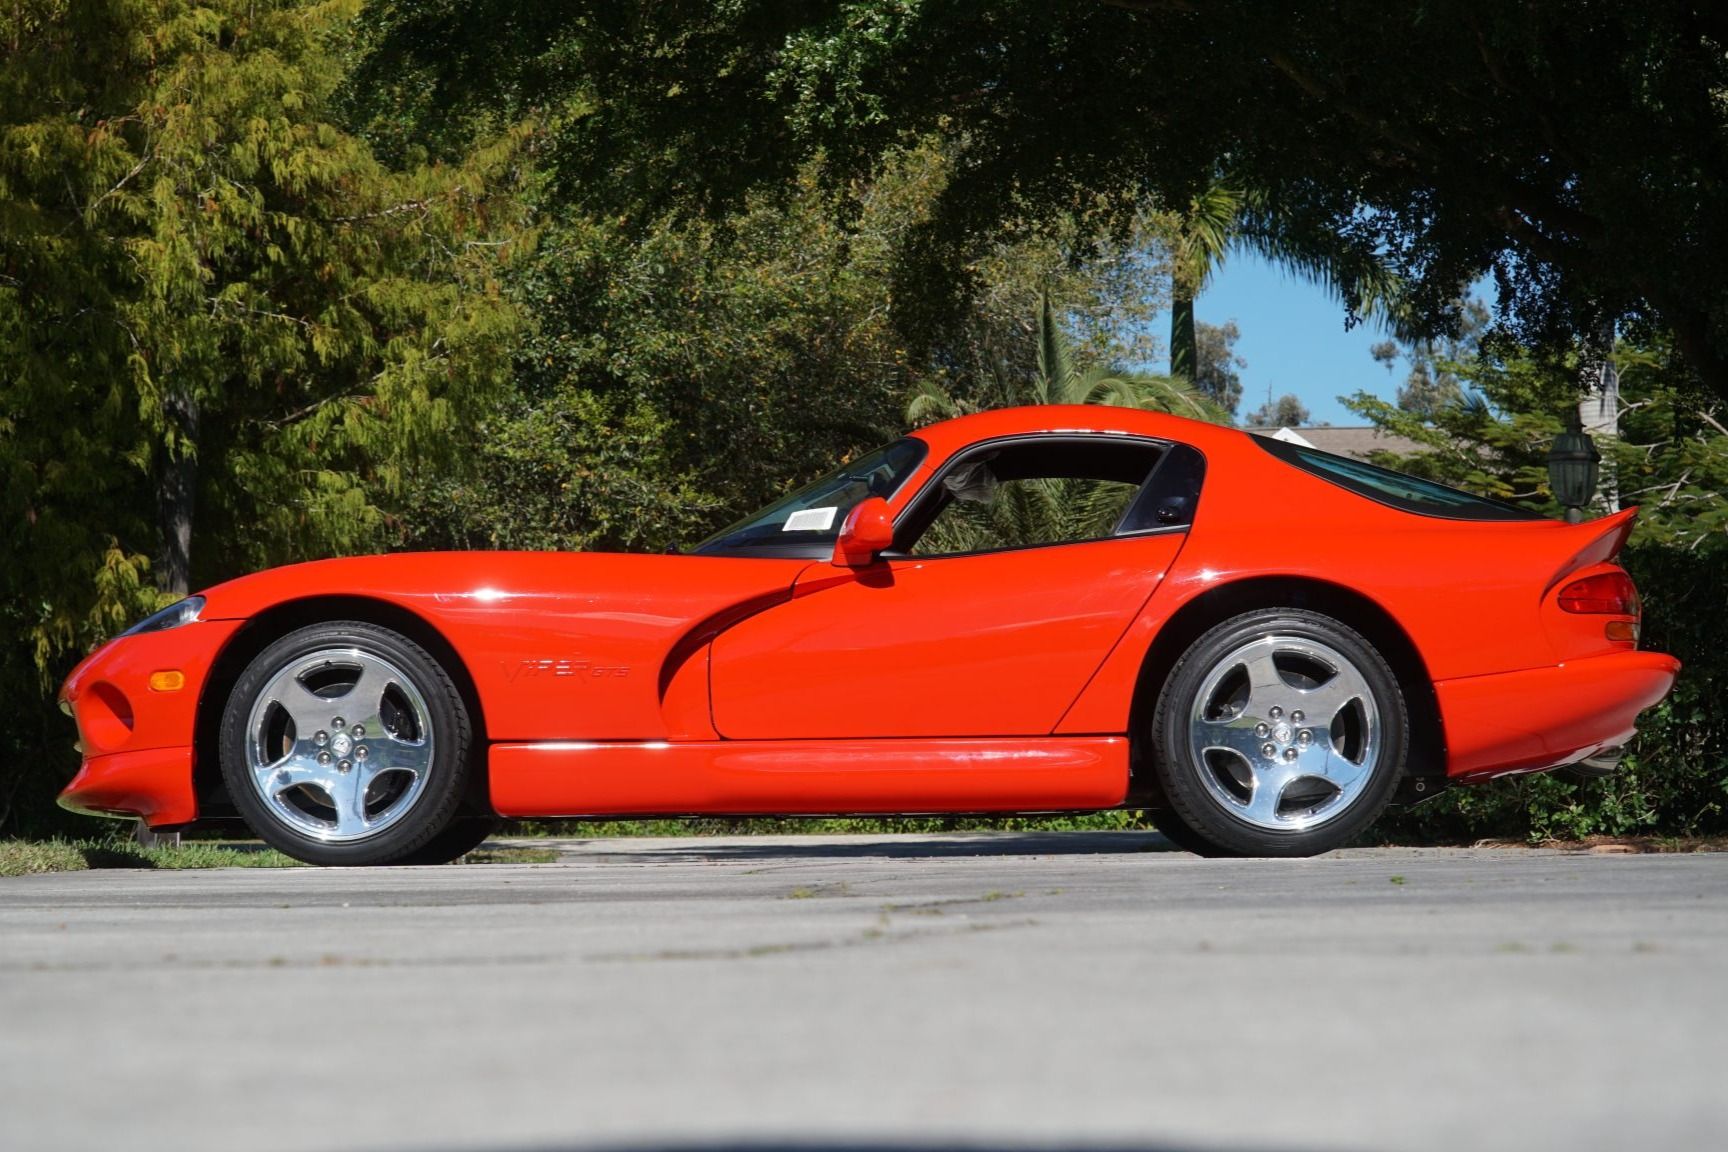 2002 Dodge Viper GTS Final Edition Auction Featured Image